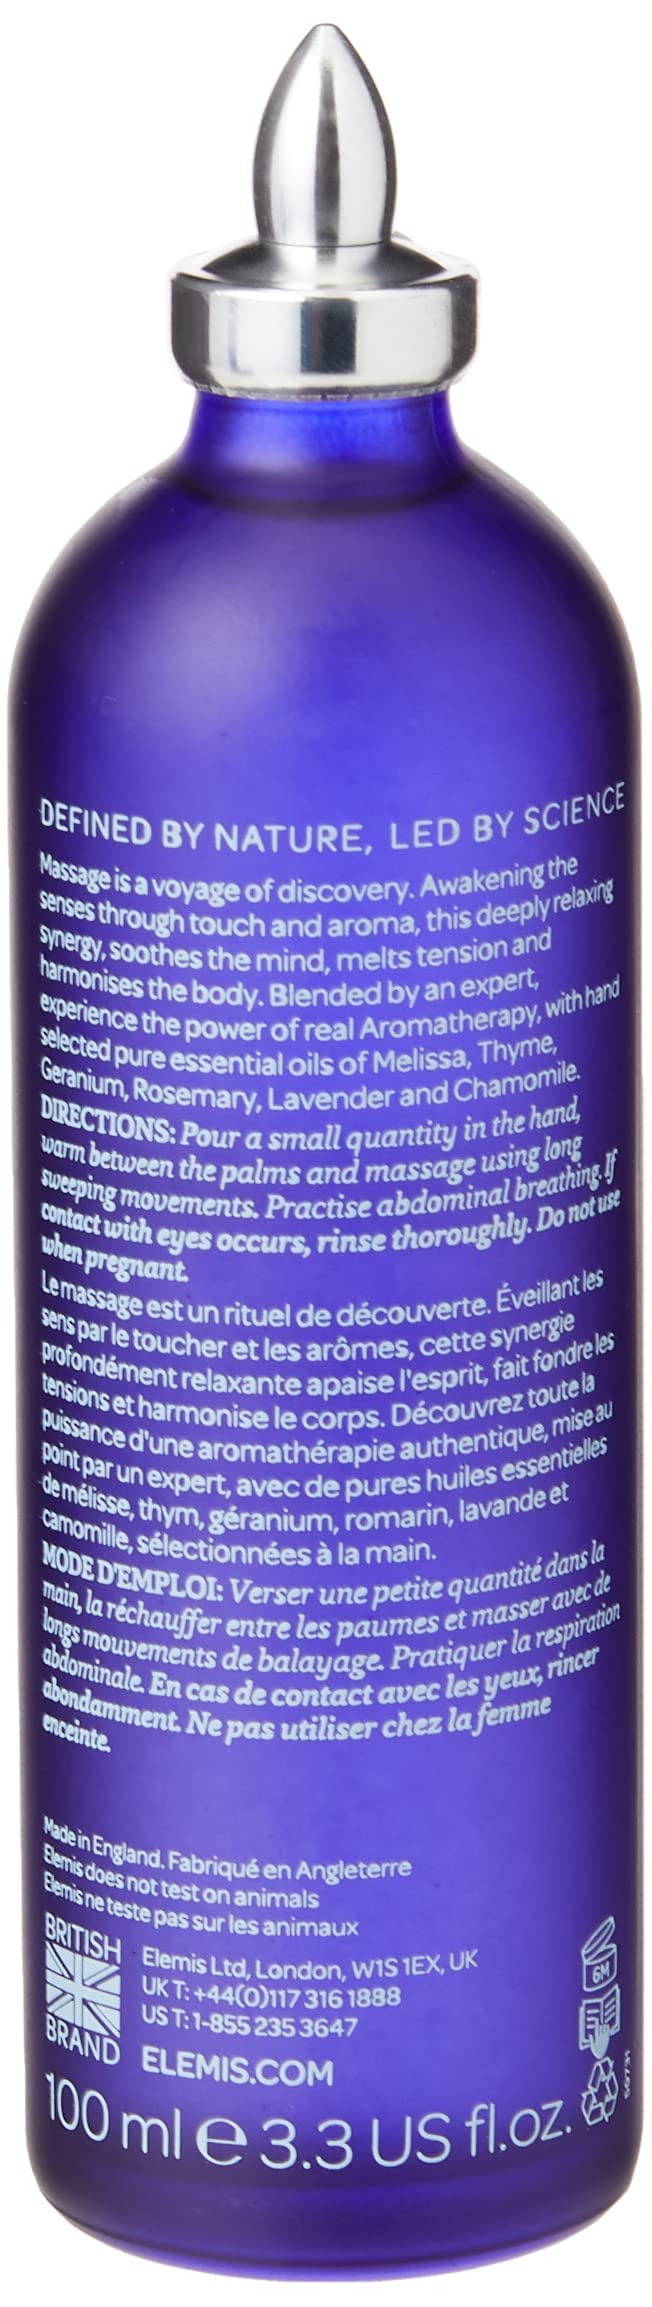 ELEMIS De-Stress Massage Oil, Relaxing Body Oil to Melt Tension and Harmonise the Body, Deeply Nourishing Massage Oil Made with Pure Essential Oils, Hydrating Body Oil for Women and Men, 100ml - BeesActive Australia